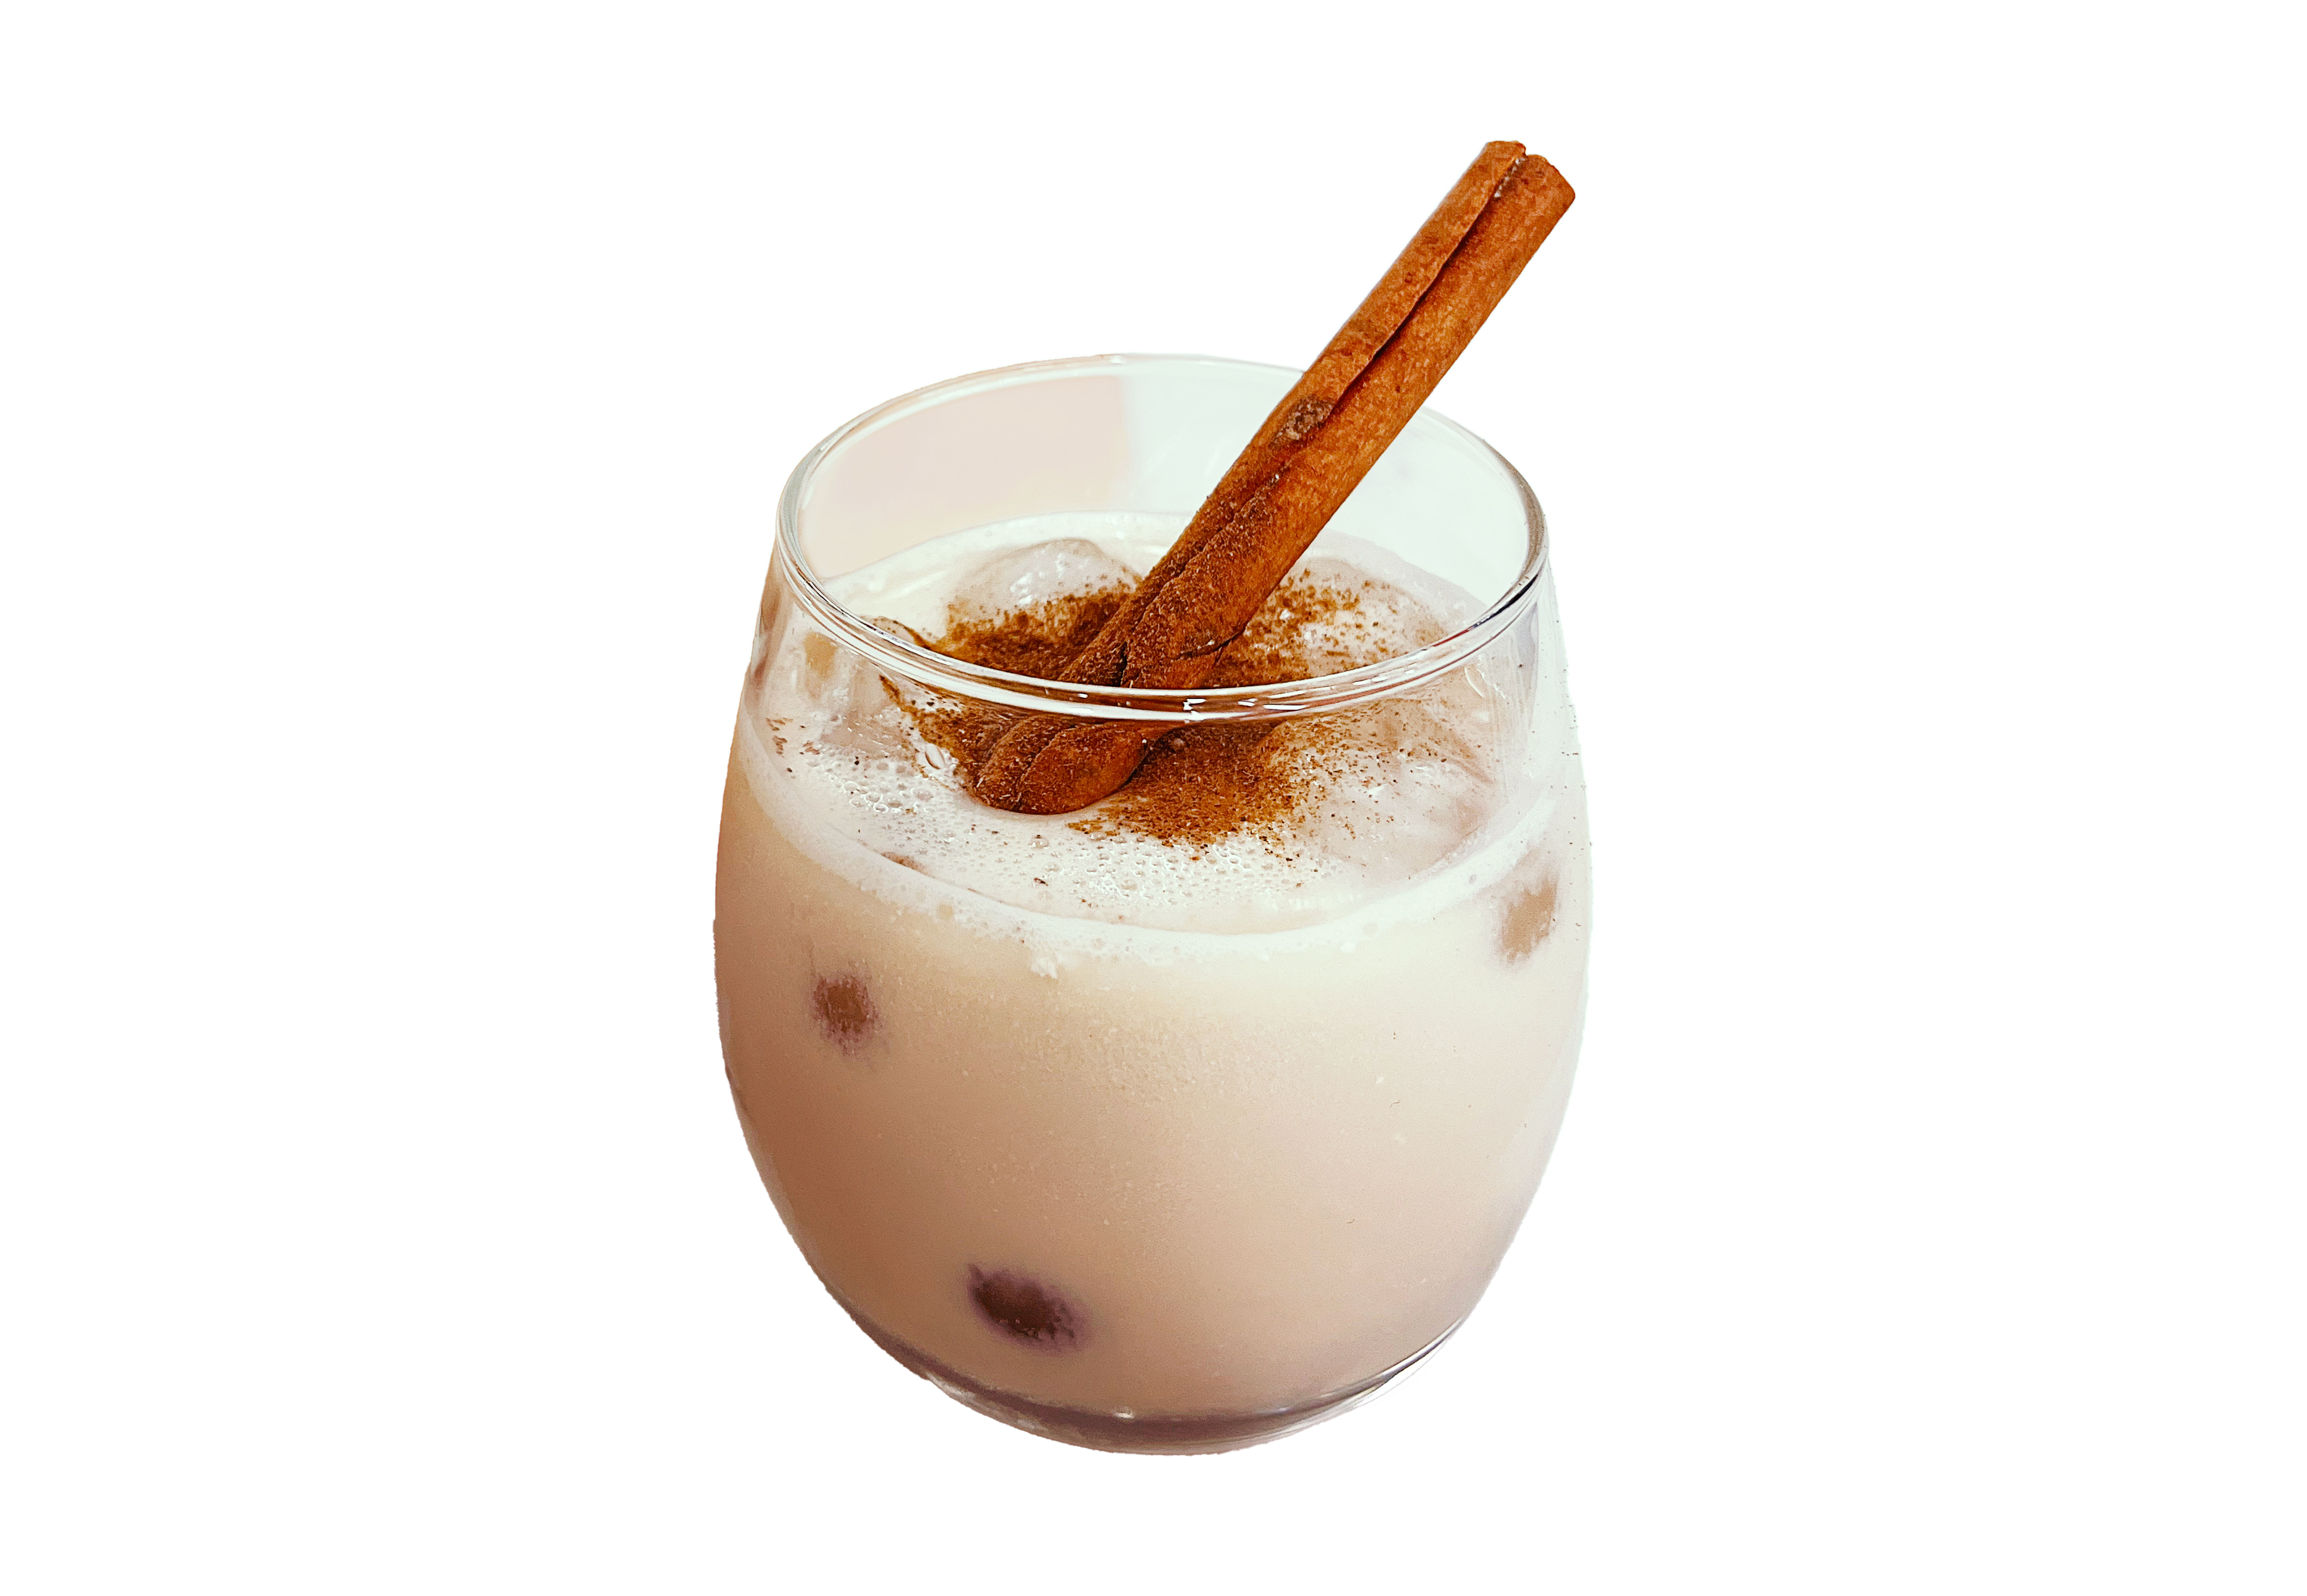 Glass of horchata with a cinnamon stick